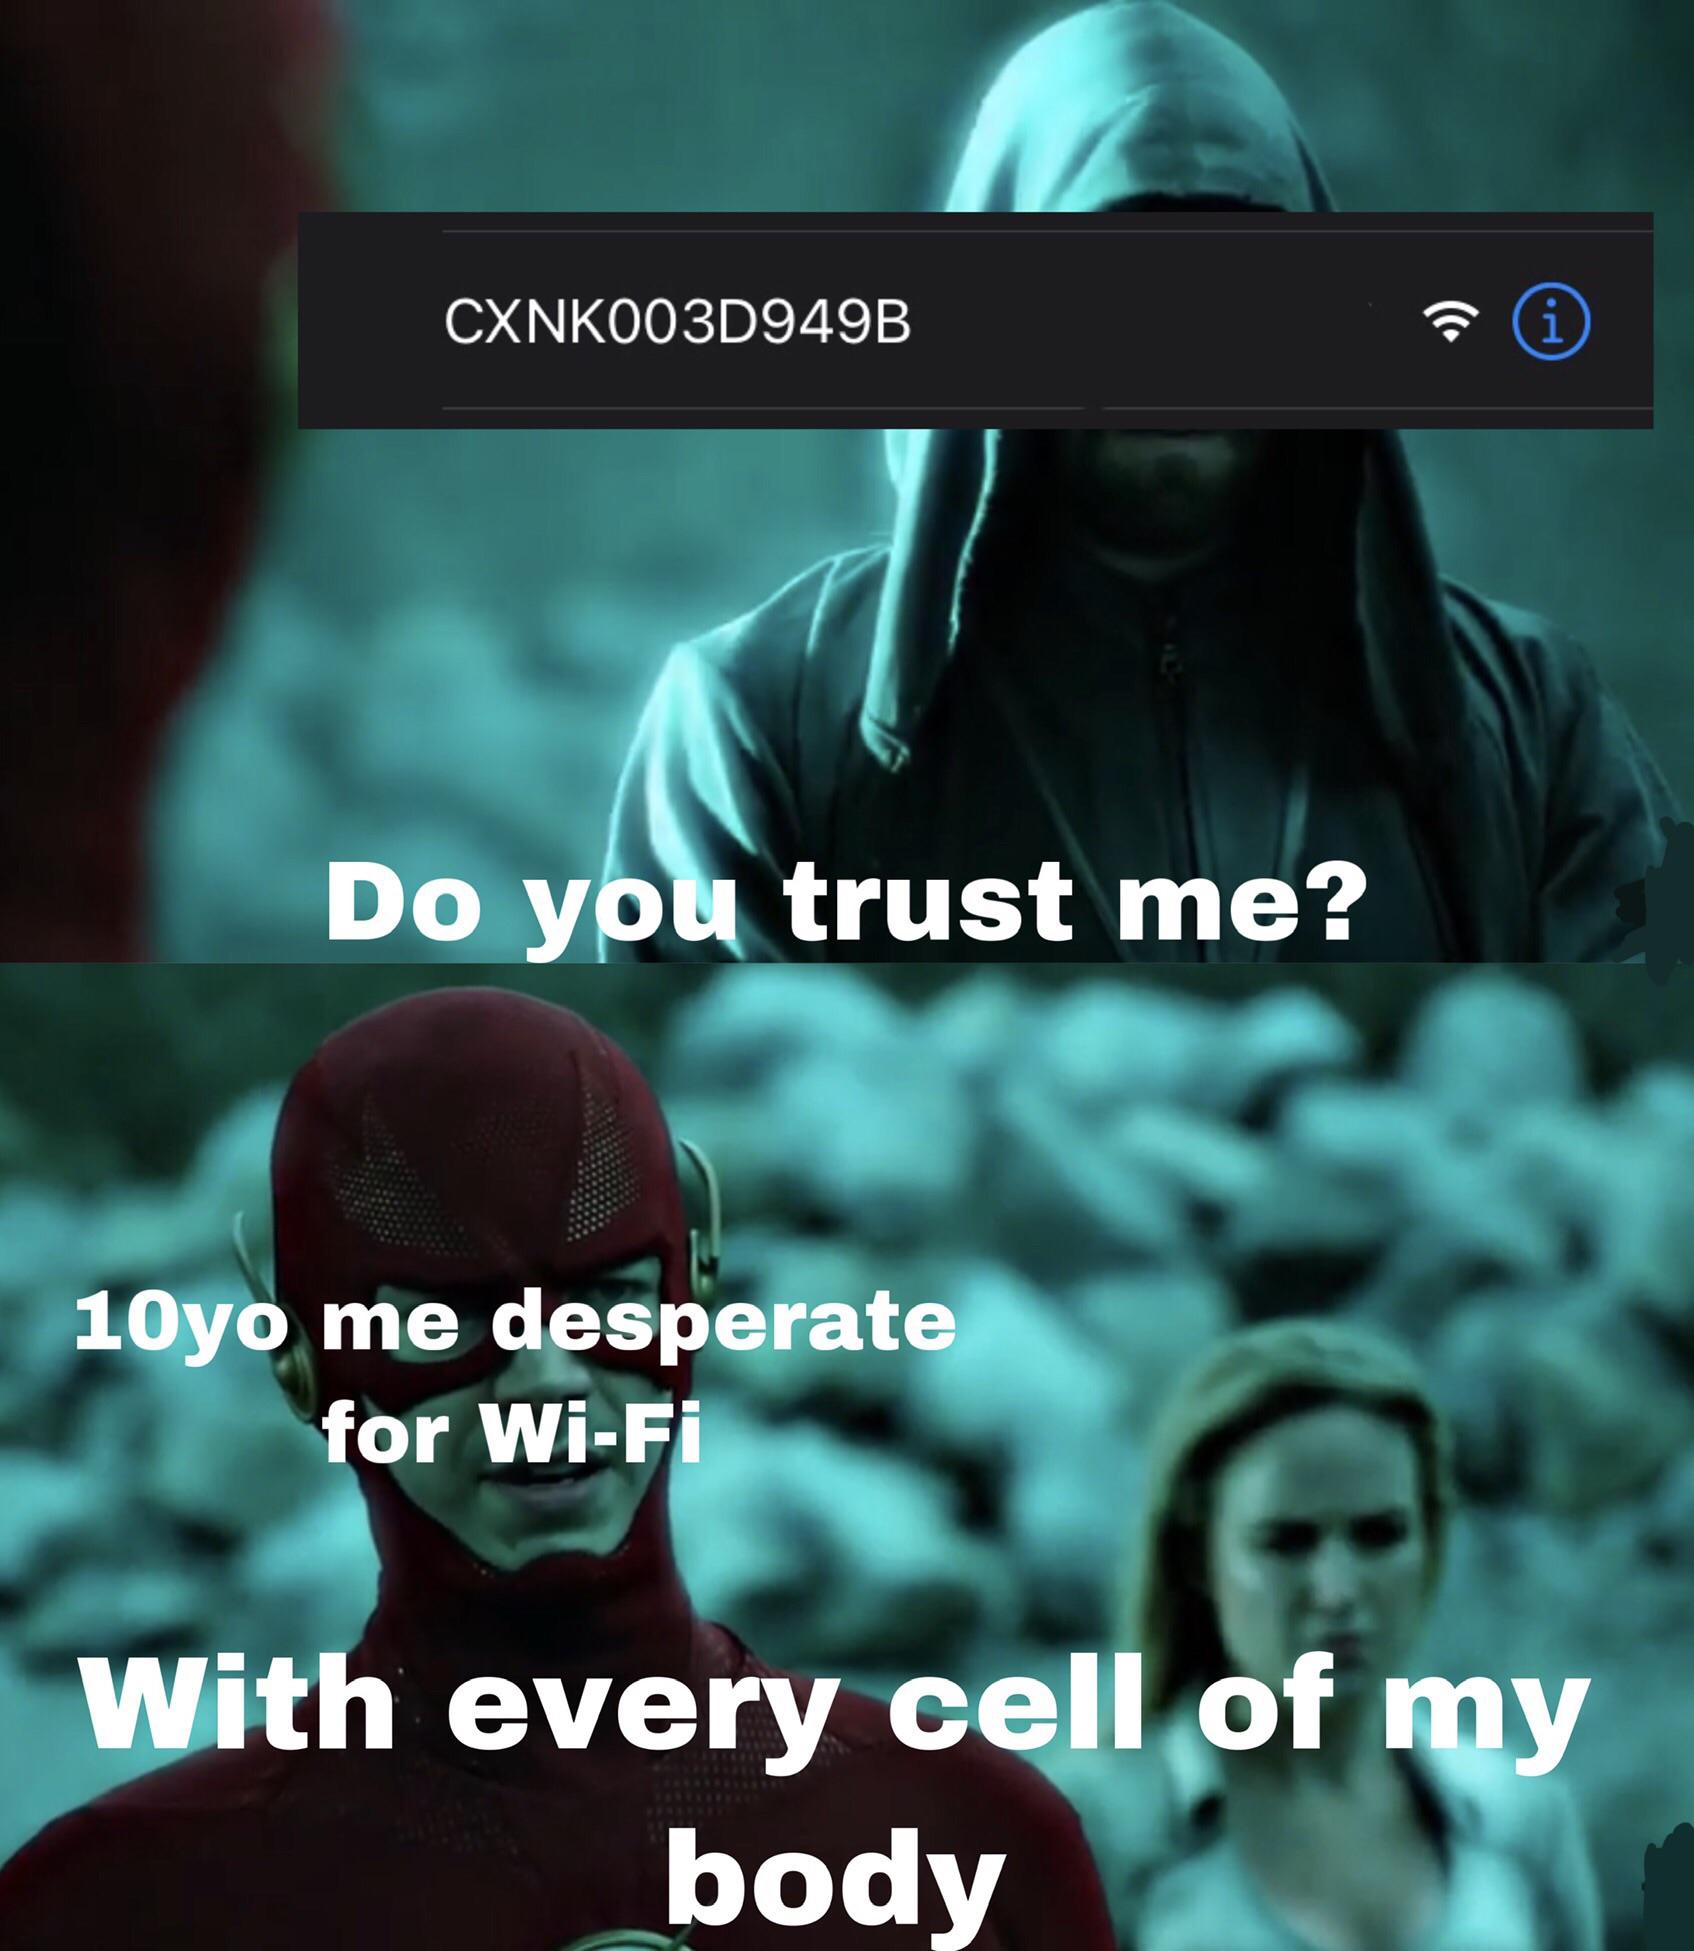 reddit dank memes 2020 - photo caption - CXNKOO3D949B i Do you trust me? 10yo me desperate for WiFi With every cell of my body